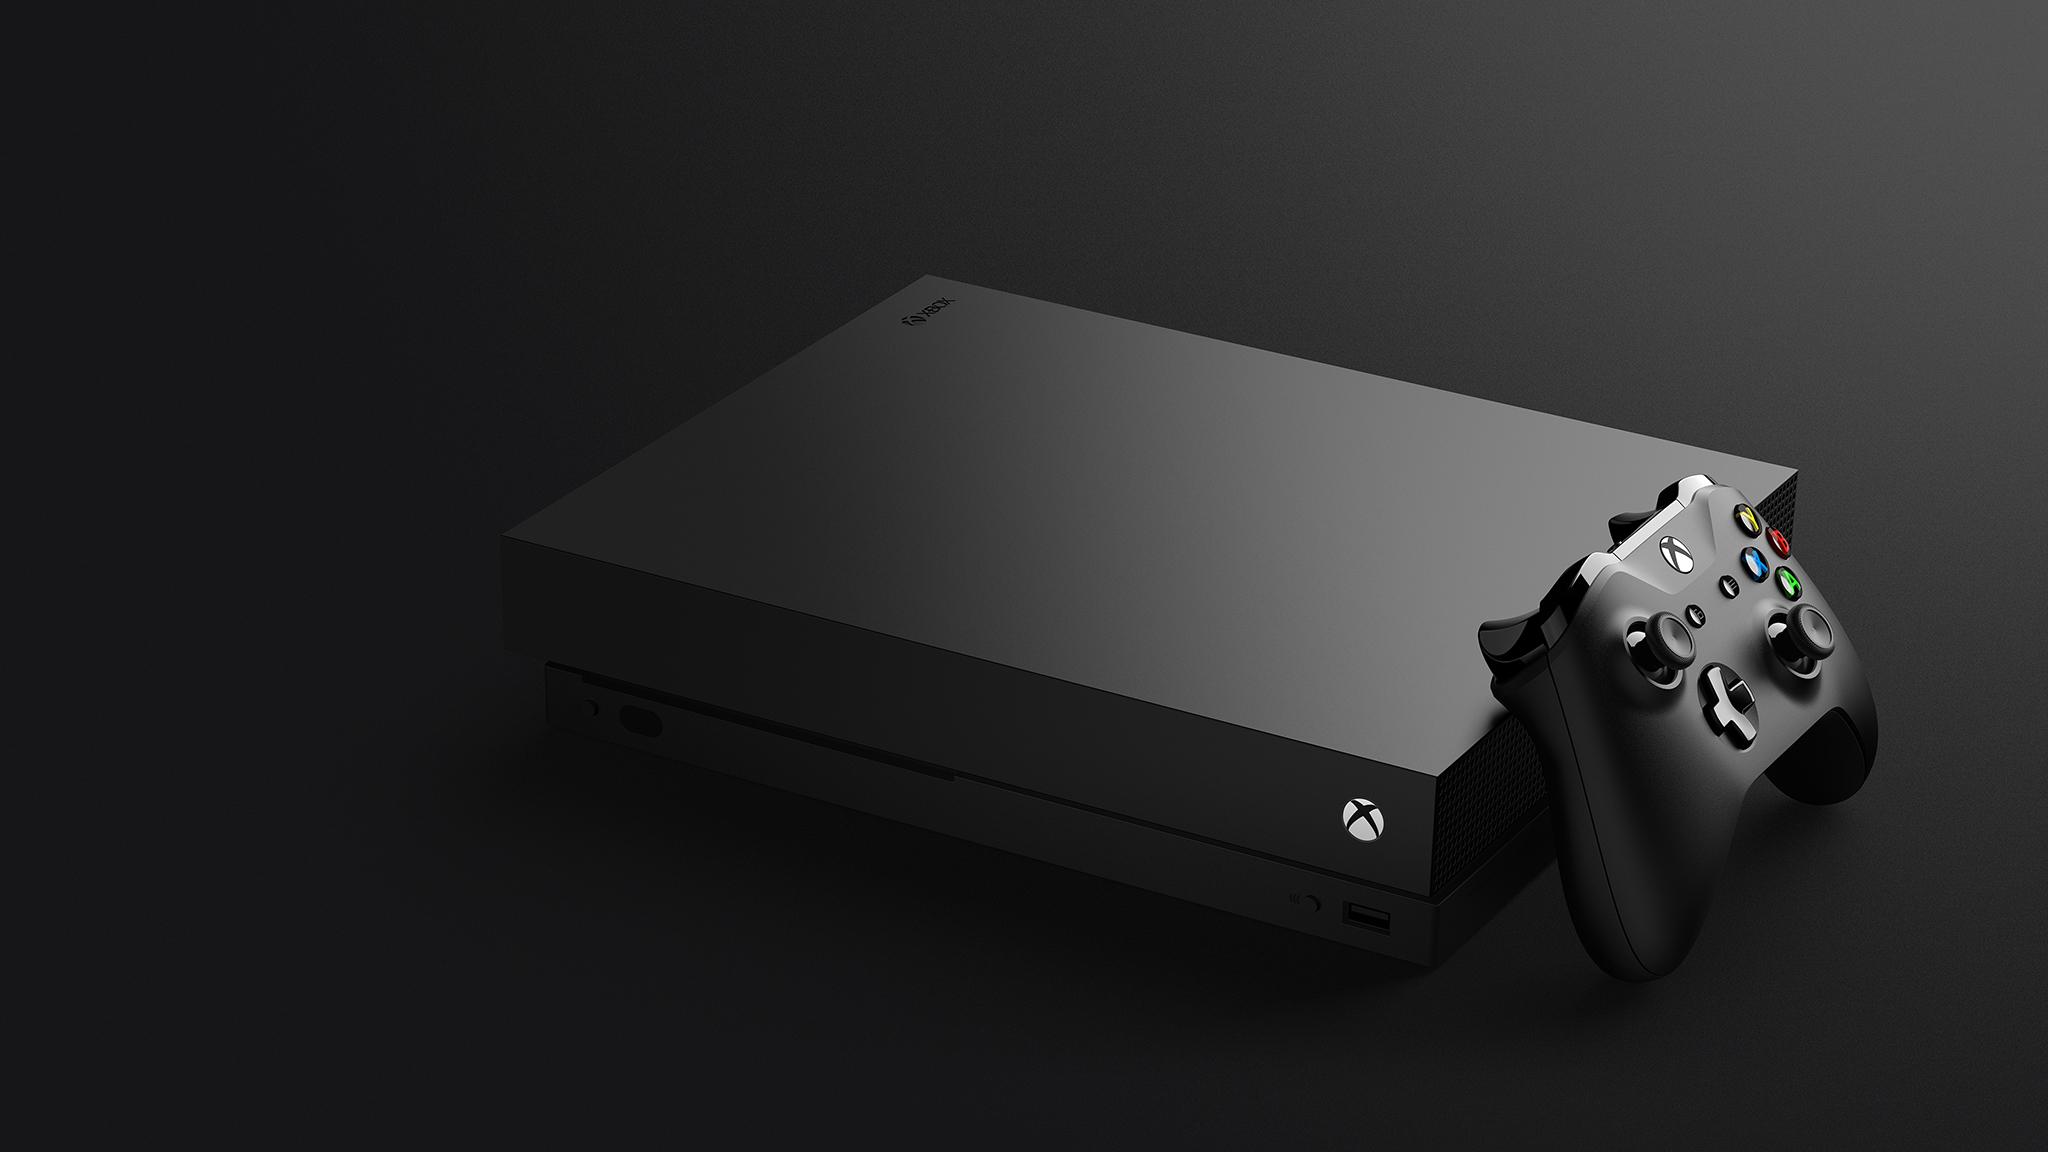 If Xbox One X Is $ How Much Will Next Gen Cost?